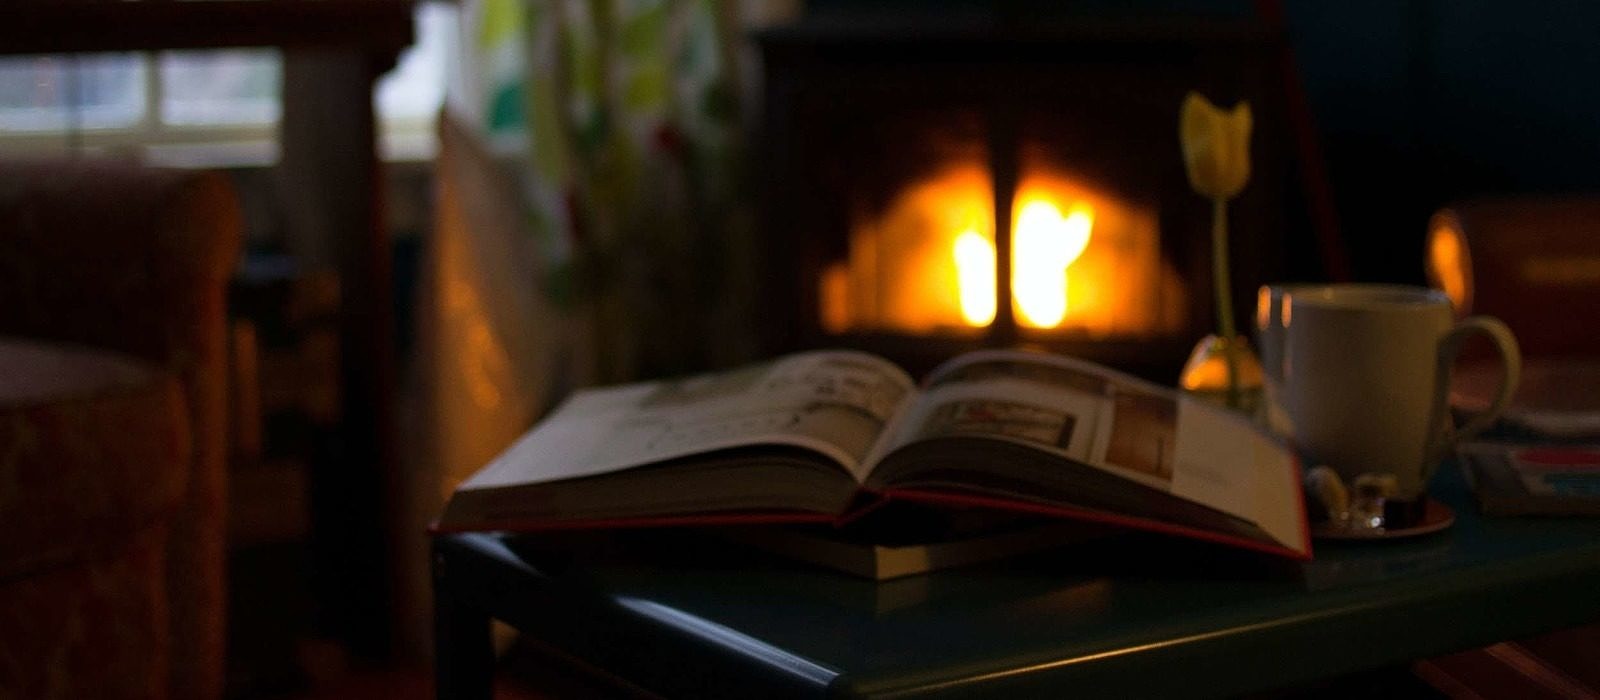 An open book lying on a table, next to a white mug, with a wood stove glowing in in the background. (photo © Pravan Trikutam via Unsplash)